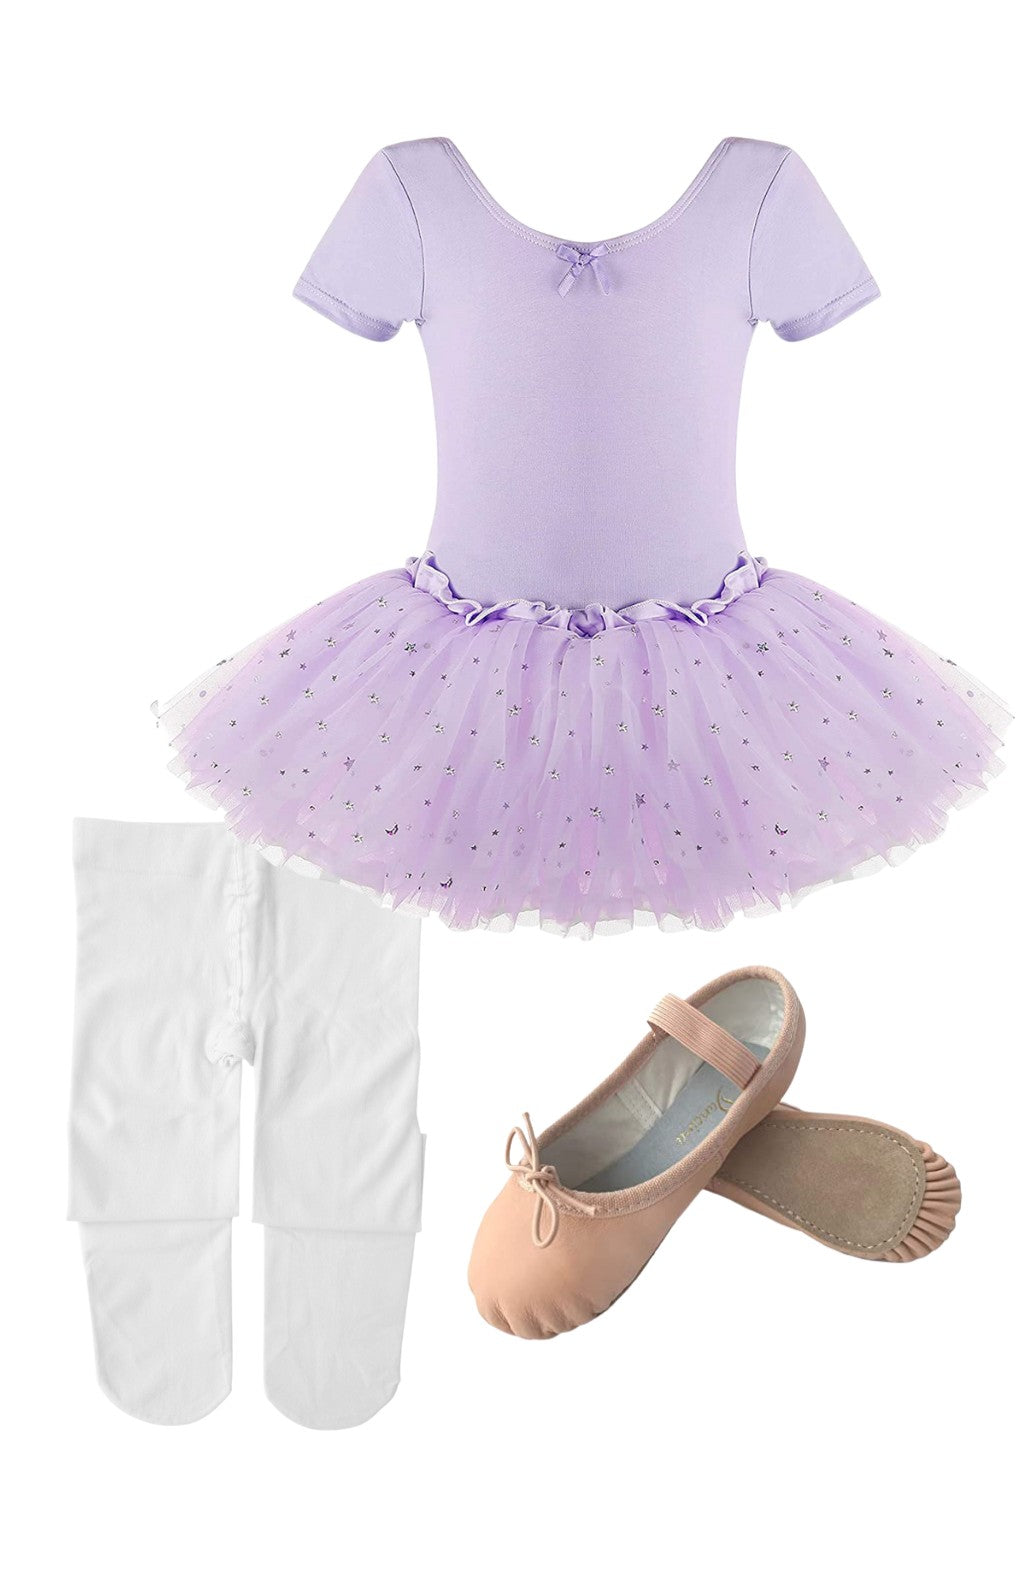 Ballerina Bundle Dress Shoes and Tights